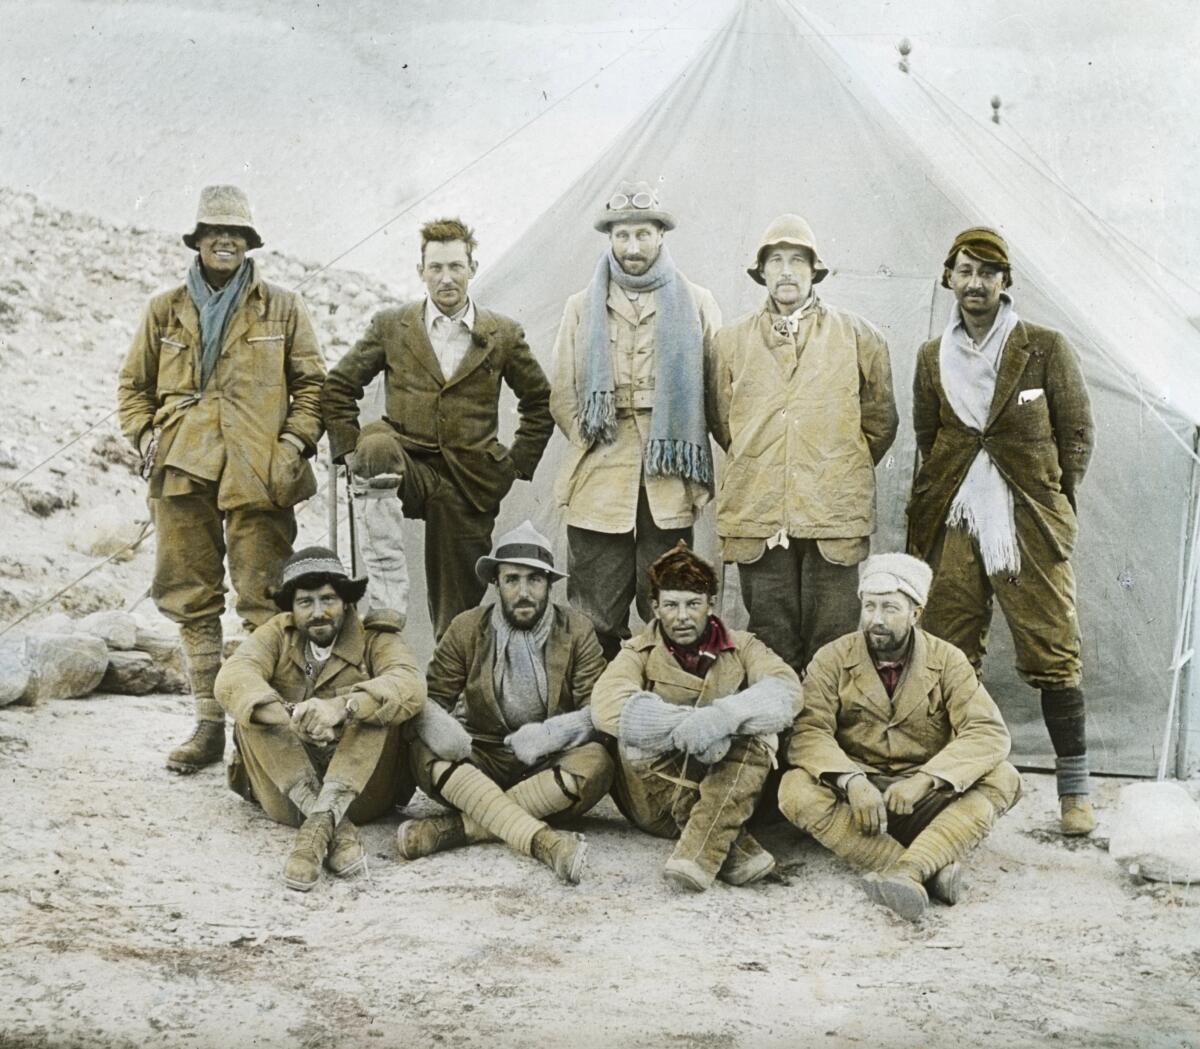 The 1924 Mt. Everest expedition in camp is shown in "Everest: Ascent to Glory."